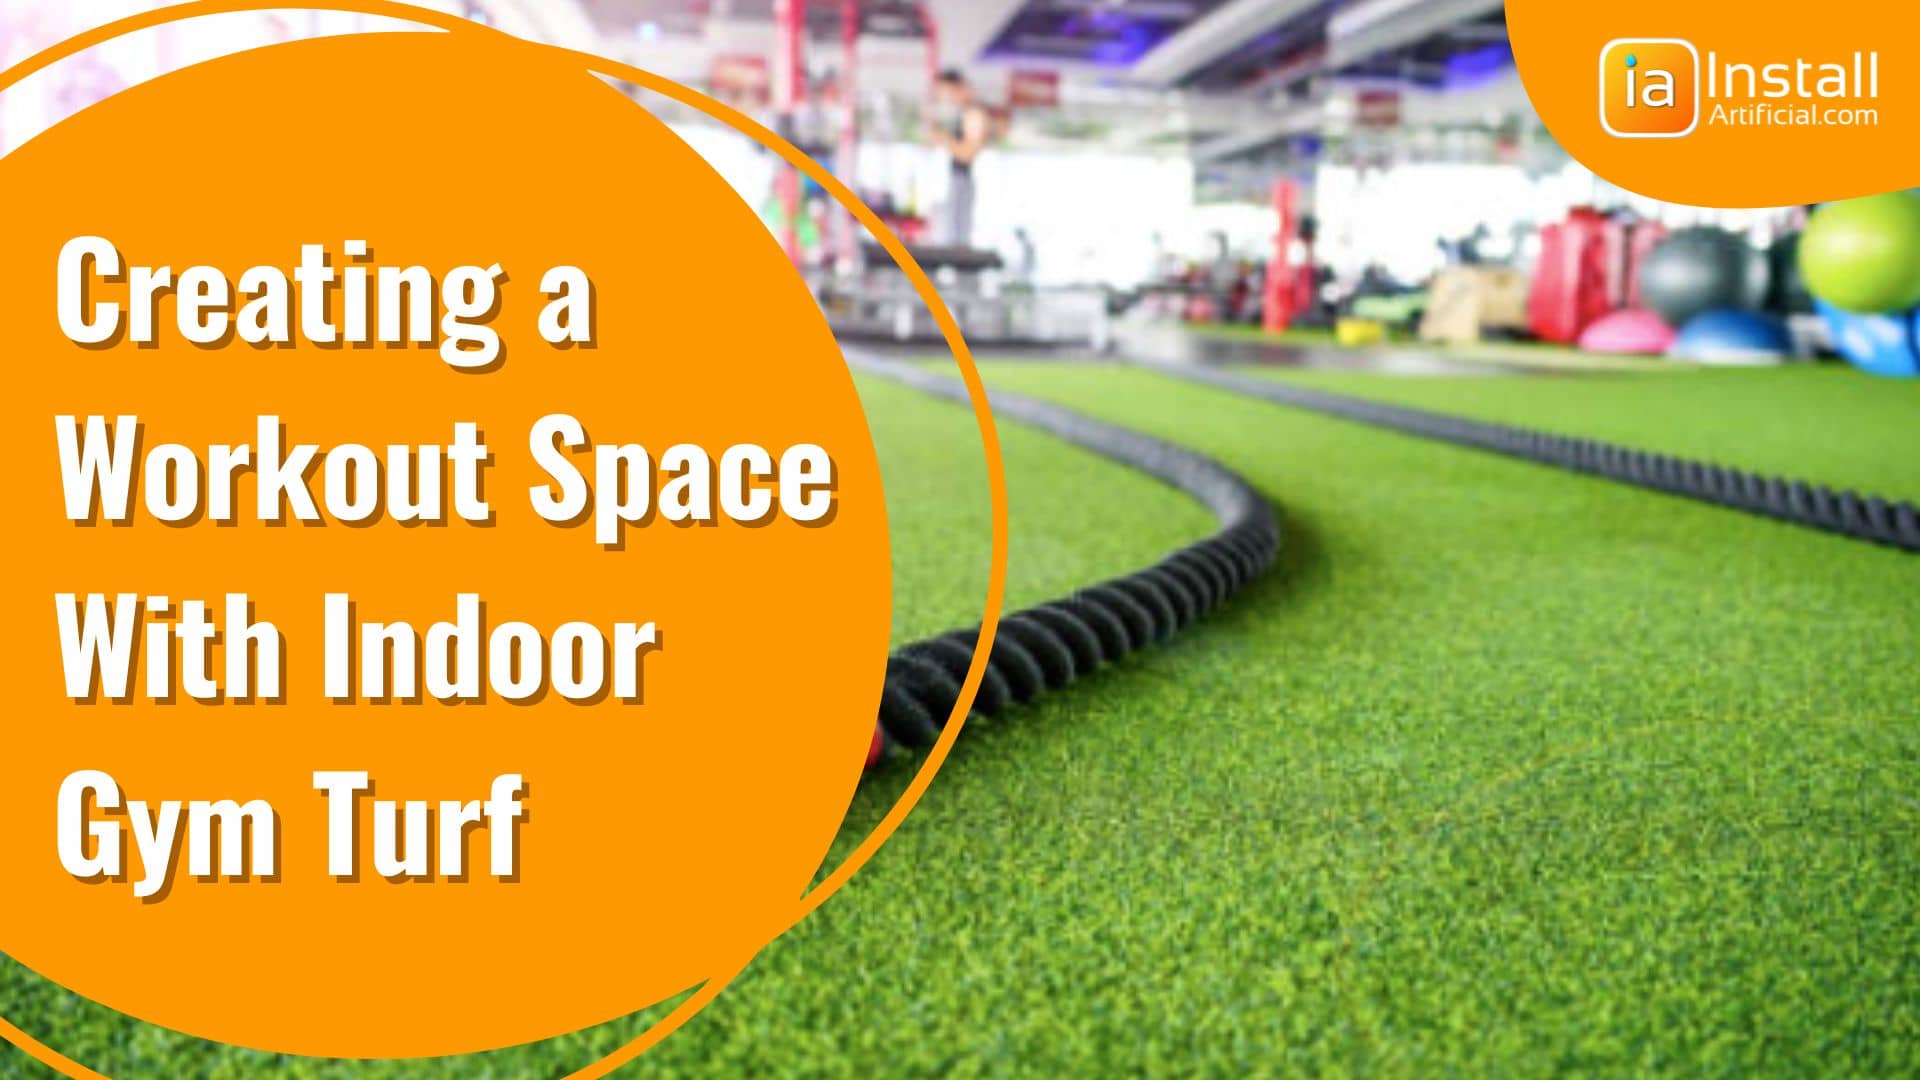 Creating a Versatile Workout Space with Indoor Gym Turf